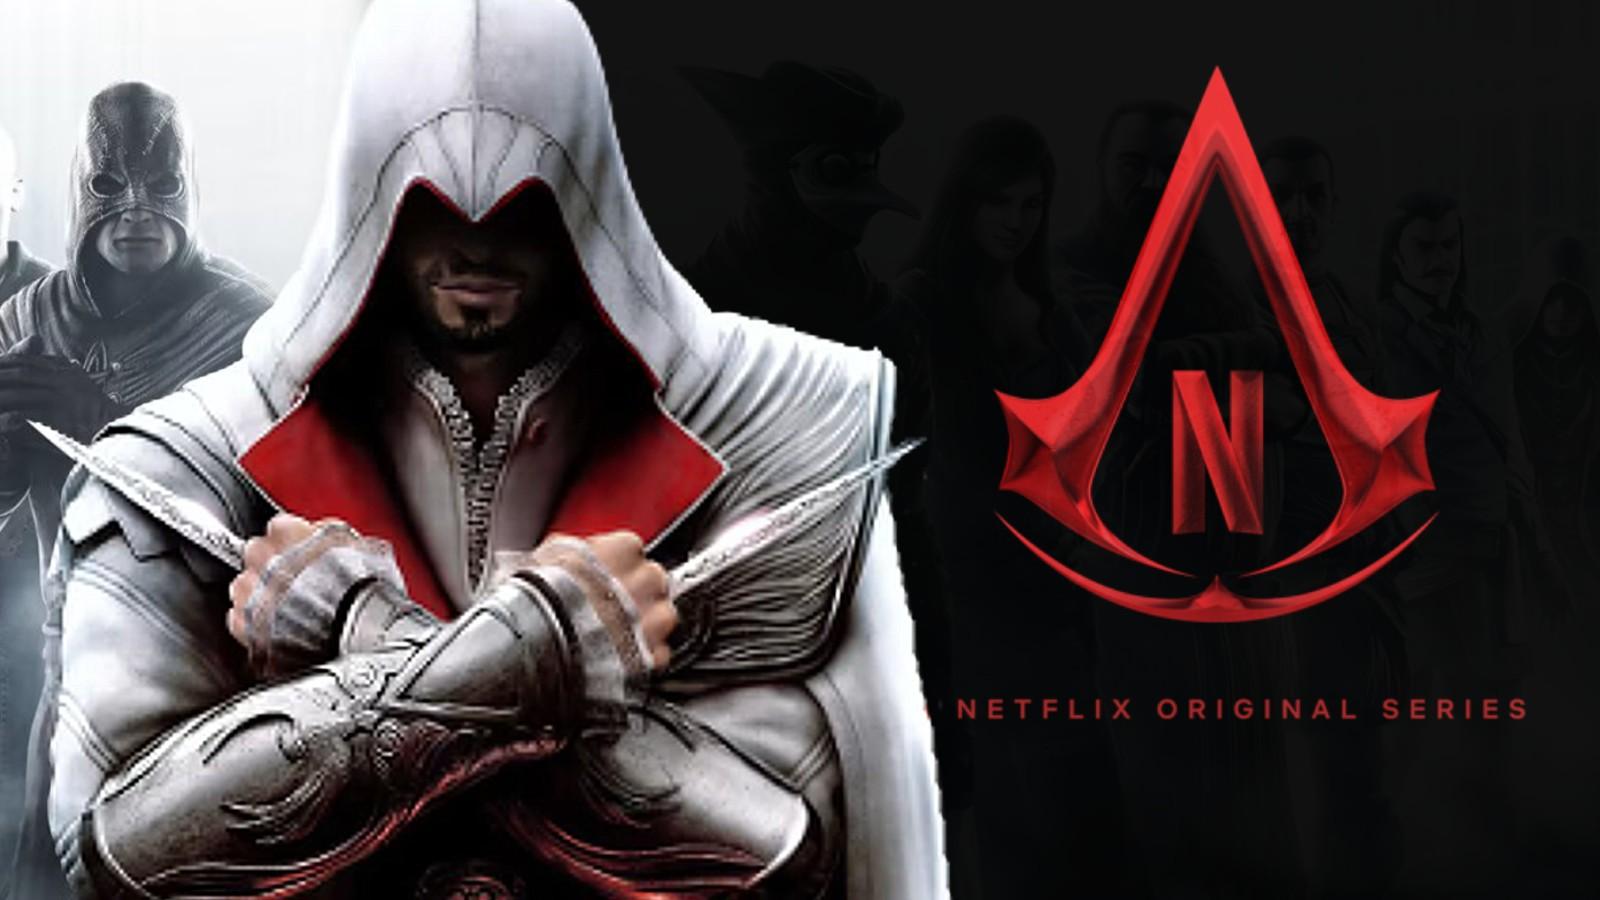 An image from Assassin's Creed and the Netflix logo